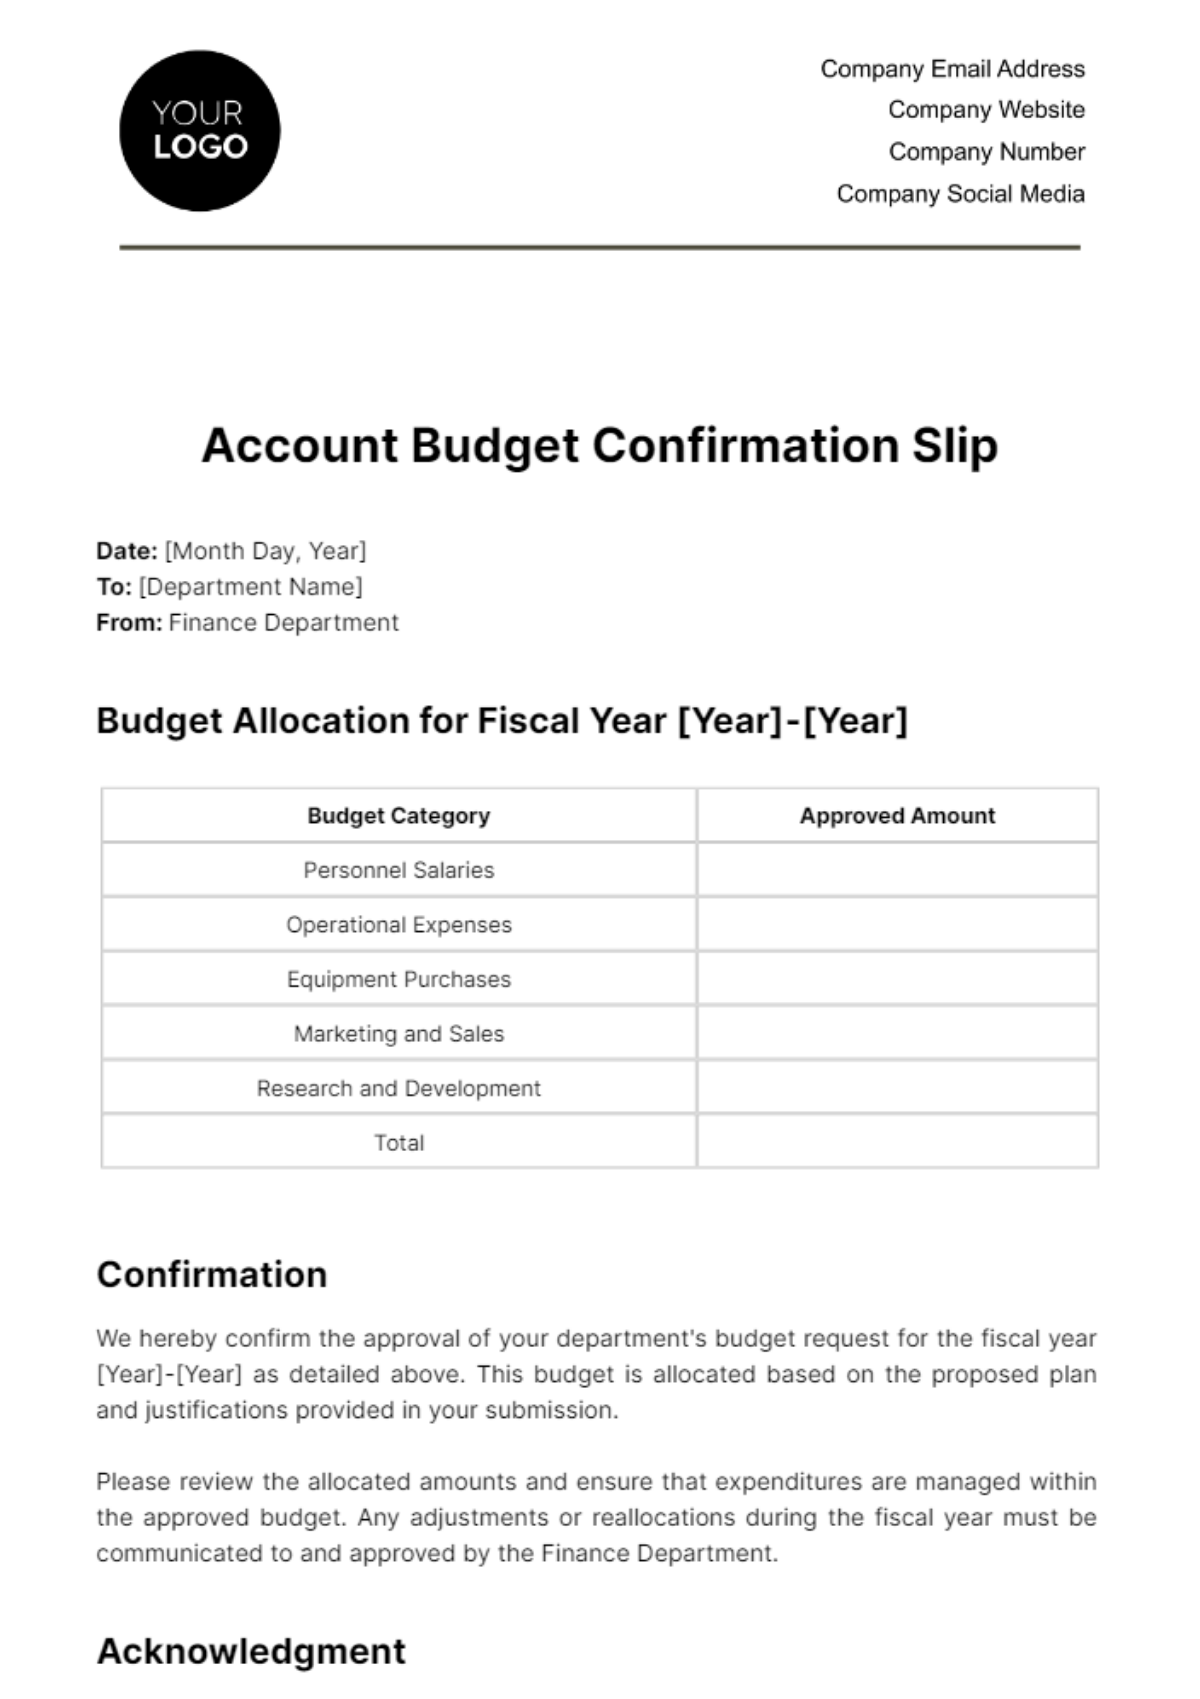 Account Budget Confirmation Slip Template